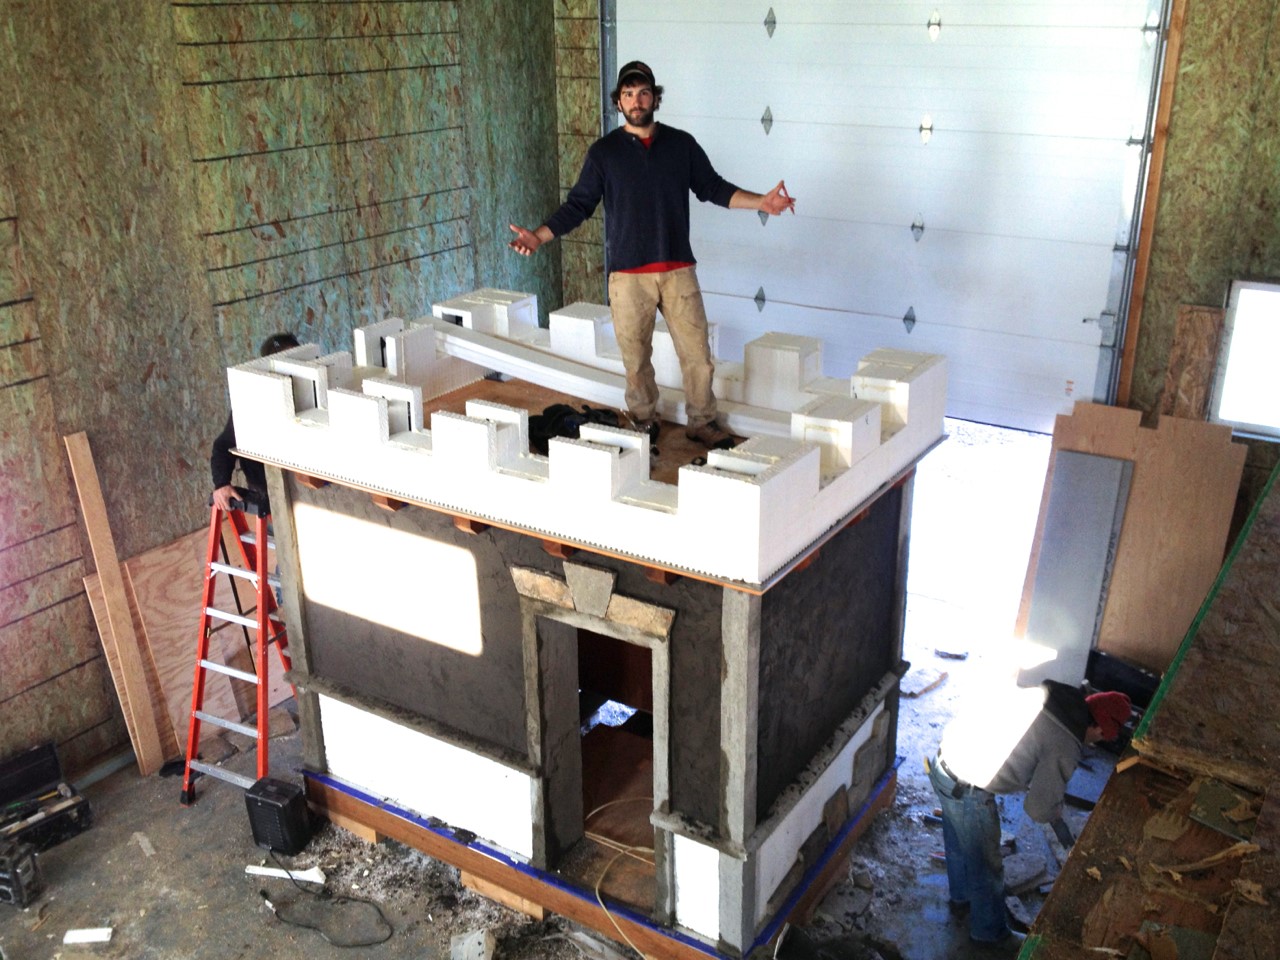 Mazzella Construction Builds ICF Playhouse for Charity